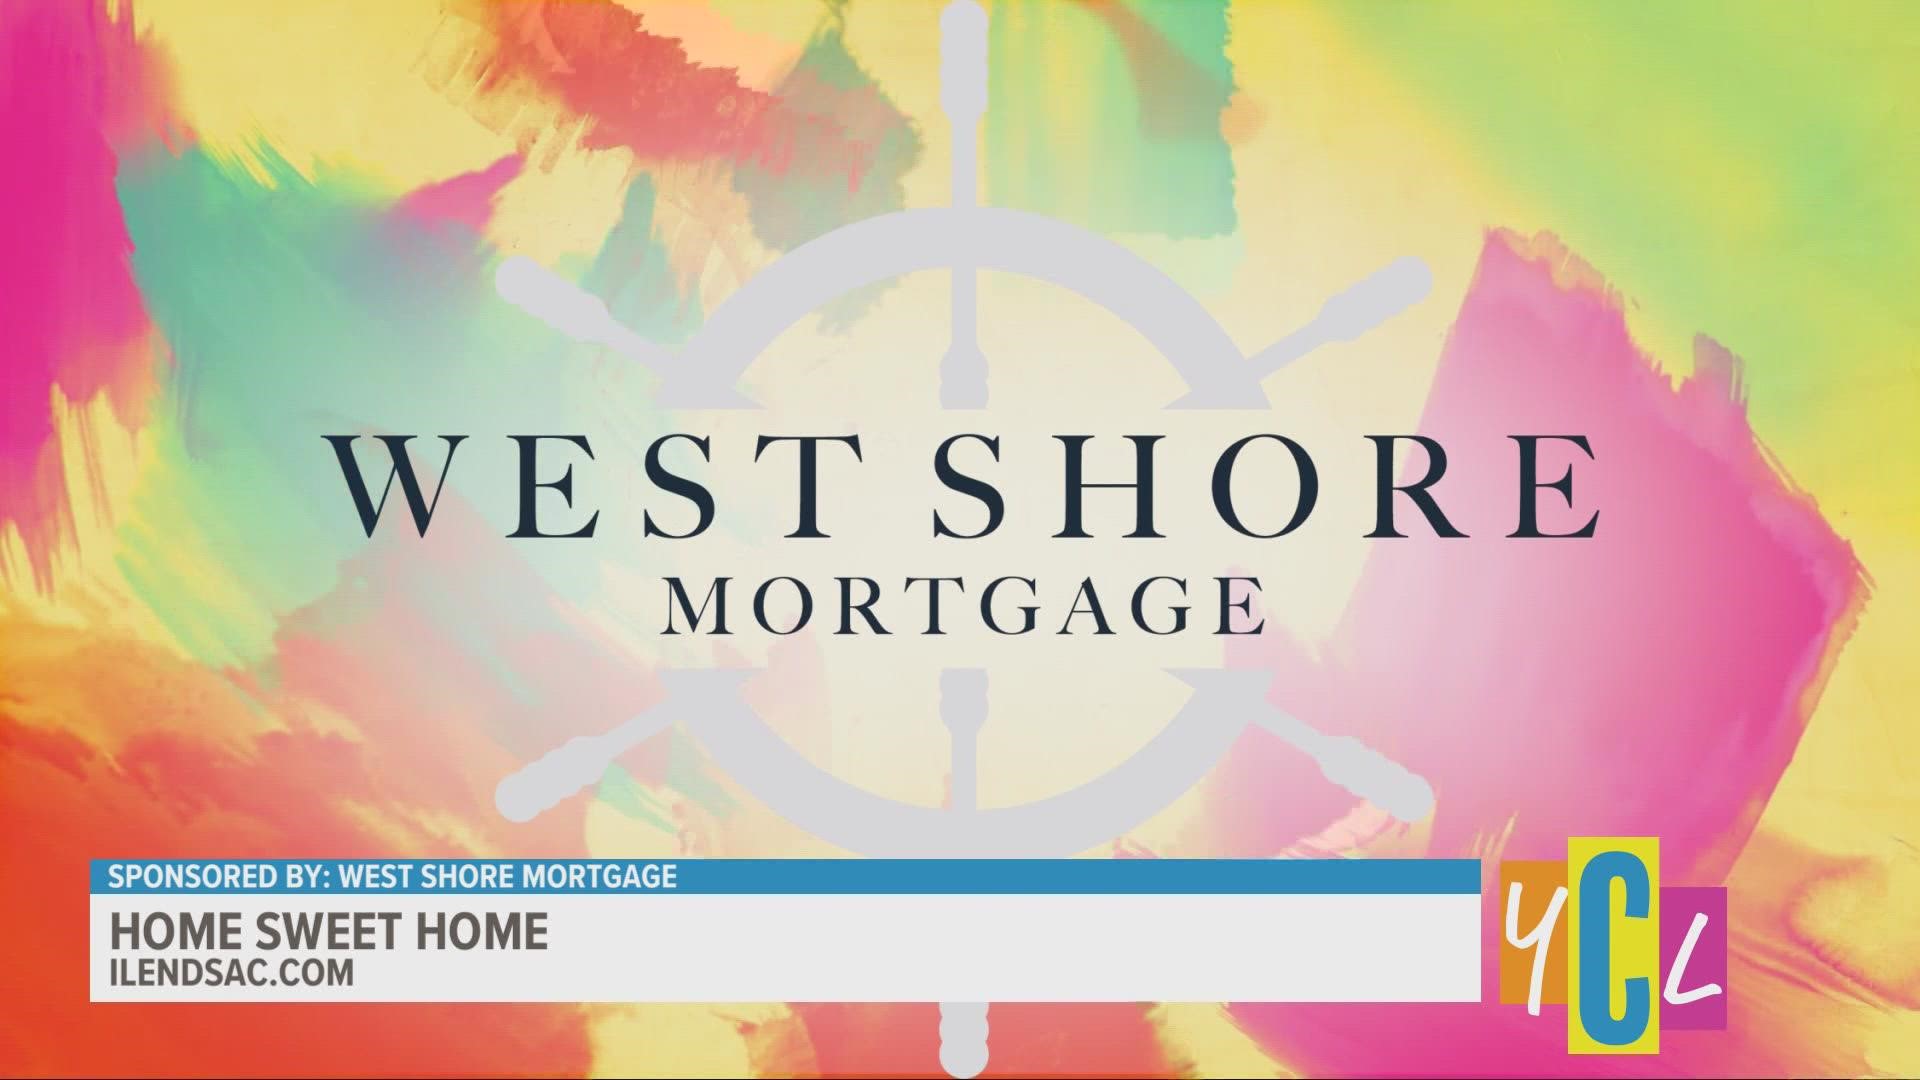 Whether you’re buying or selling a home, we’ll have the professionals share how to do so successfully. This segment paid for by West Shore Mortgage.